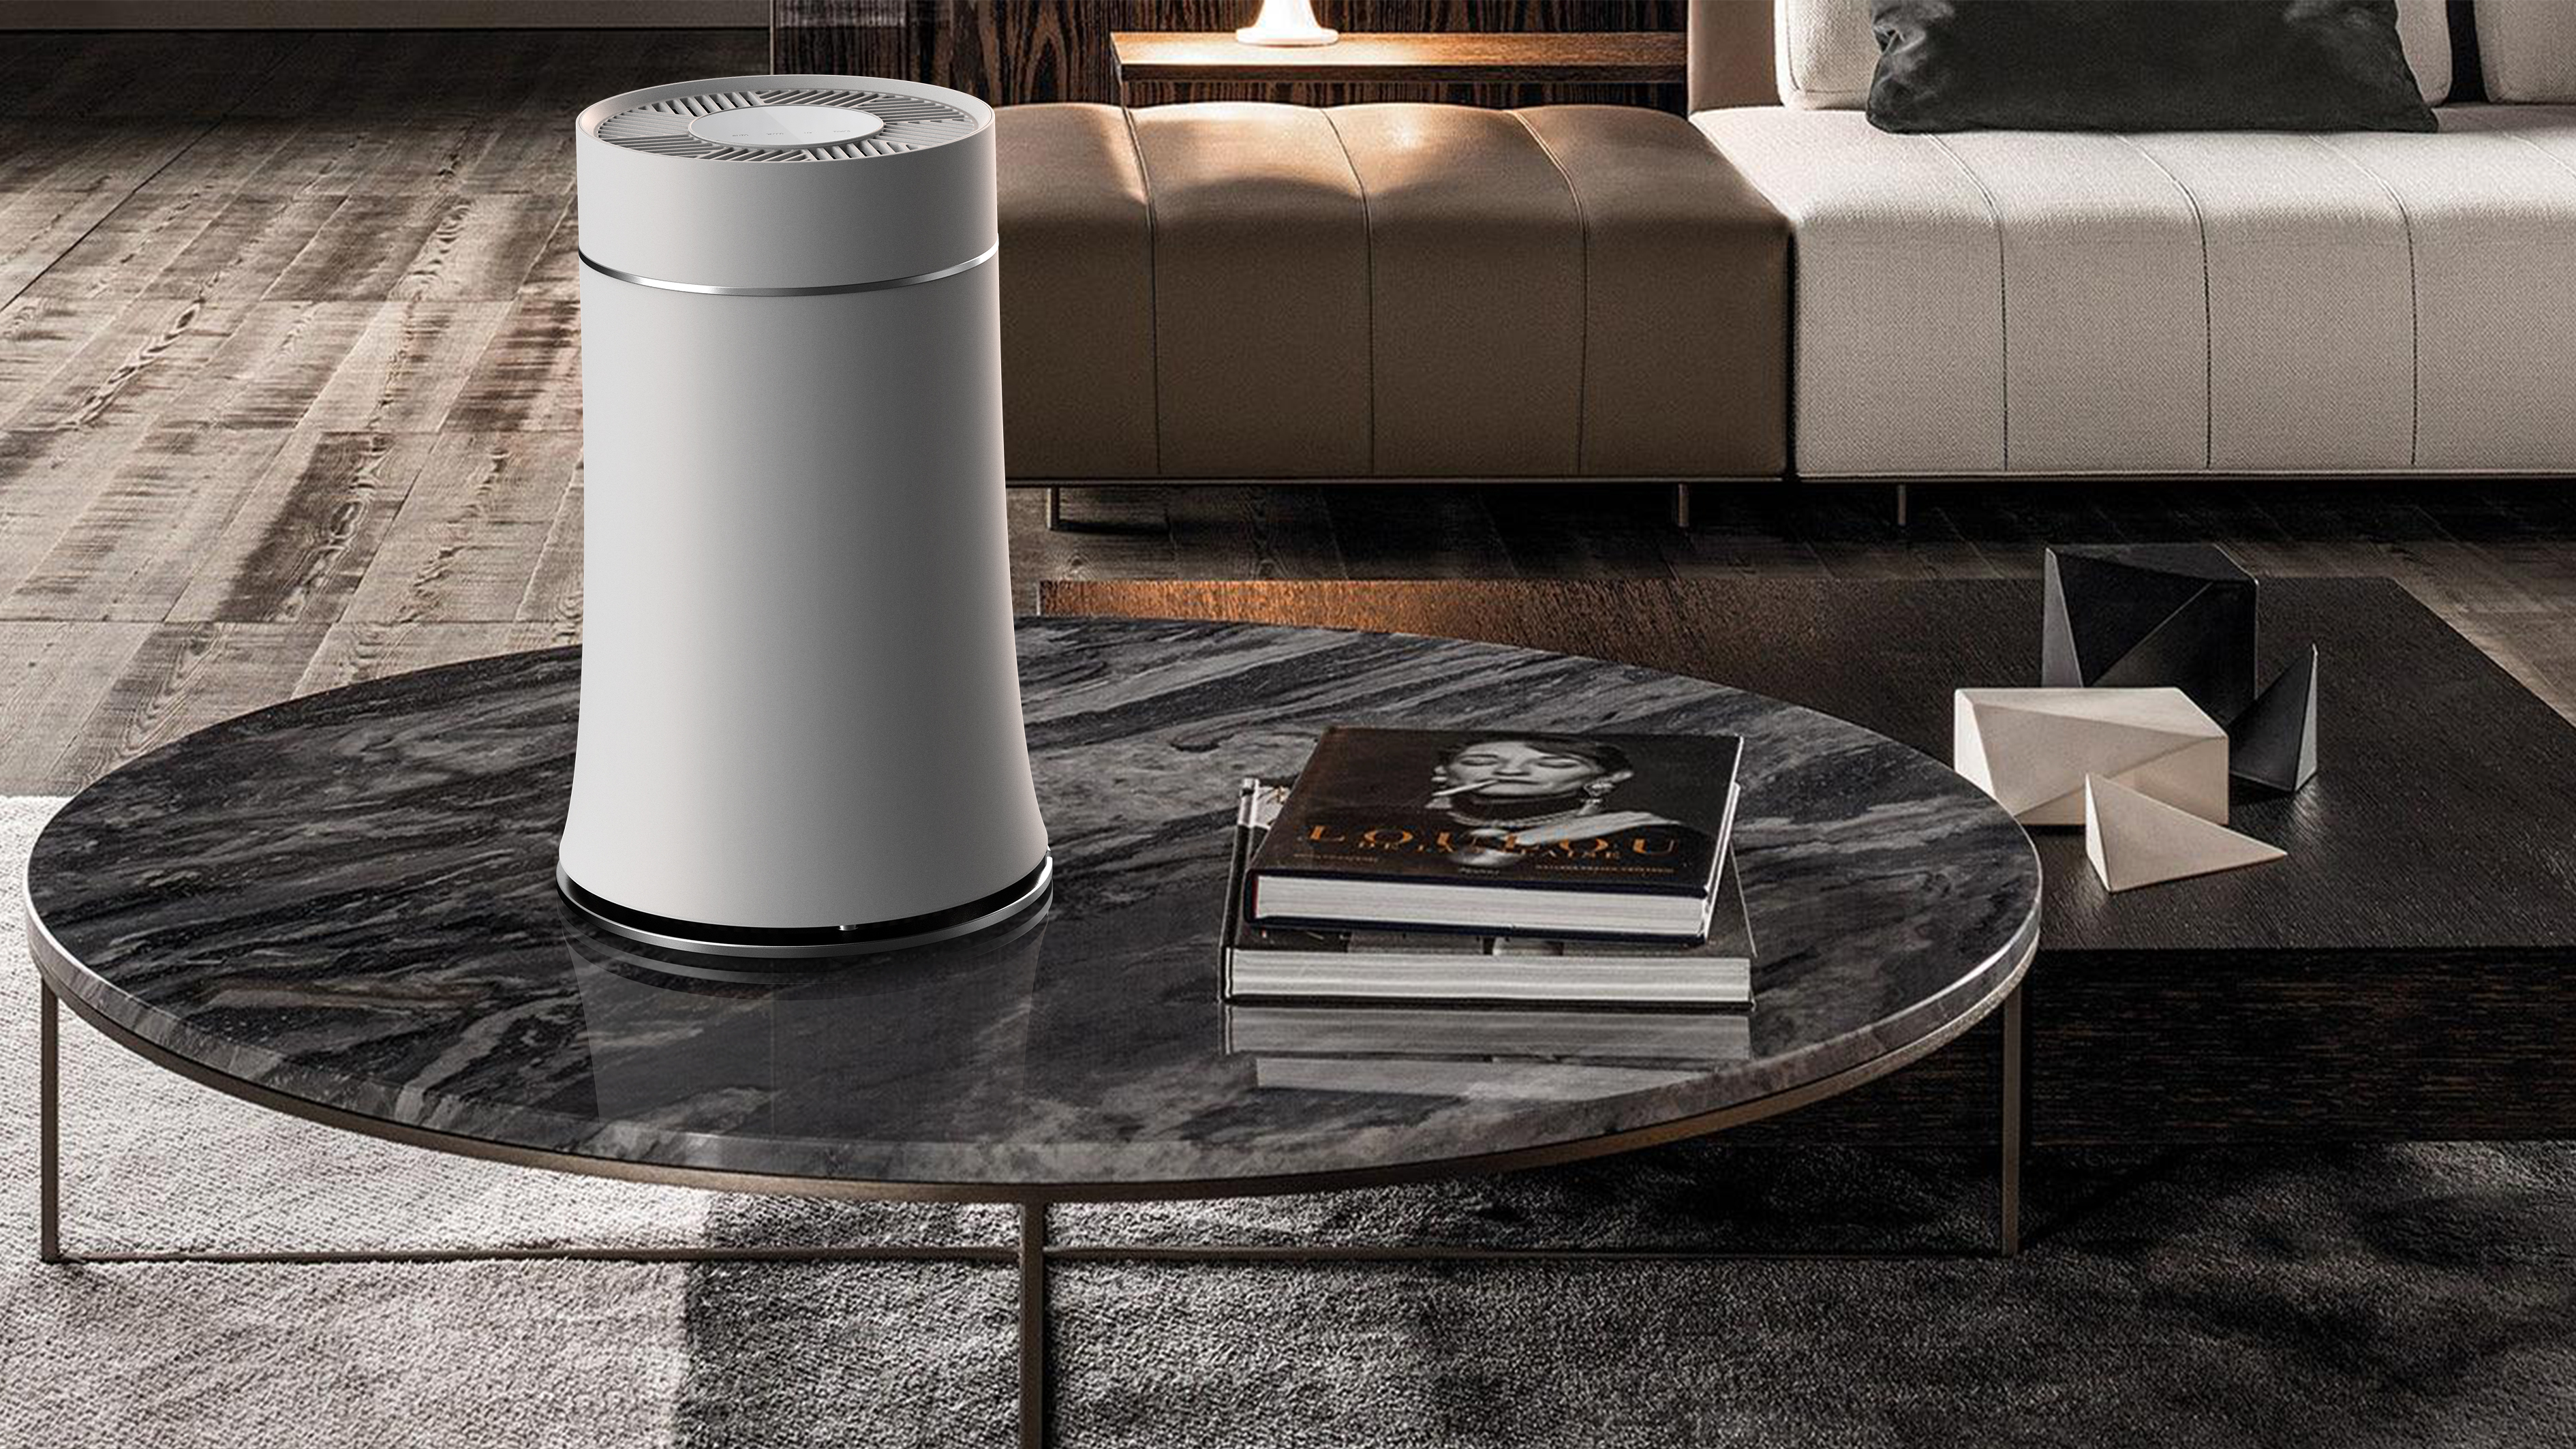 What to Consider When Buying an Air Purifier?